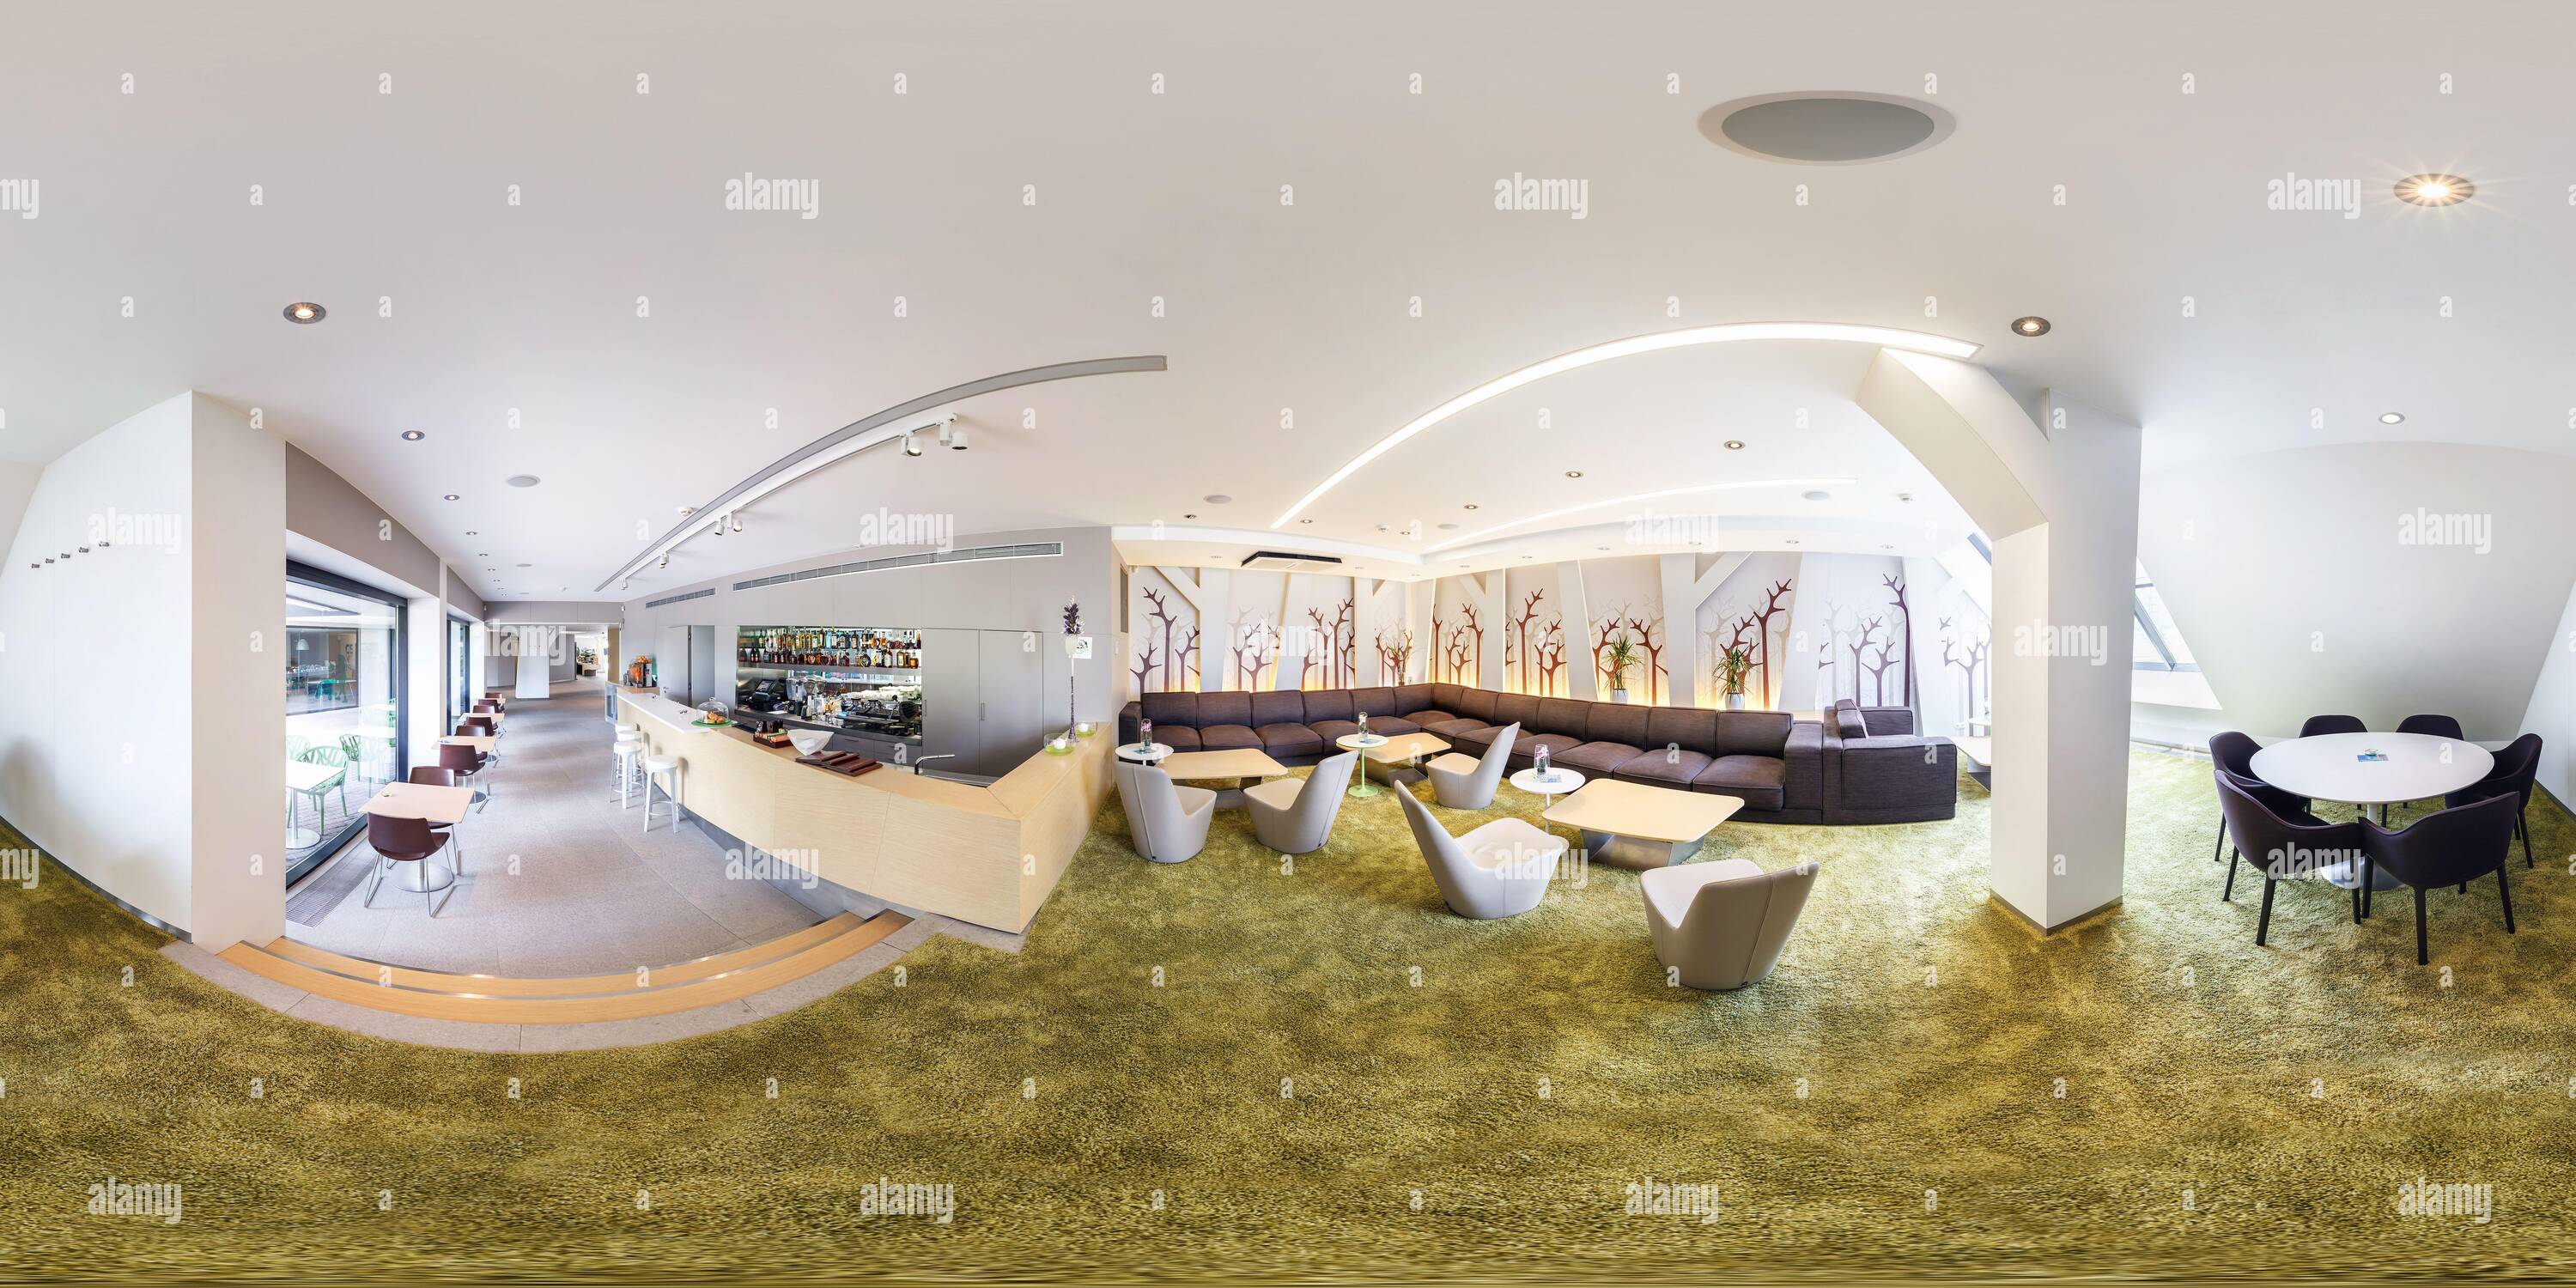 360 degree panoramic view of PRAHA, Czech Republic - JULY 22, 2014: Full 360 panorama in equirectangular spherical projection in stylish cafe complex Central Park in minimalist st